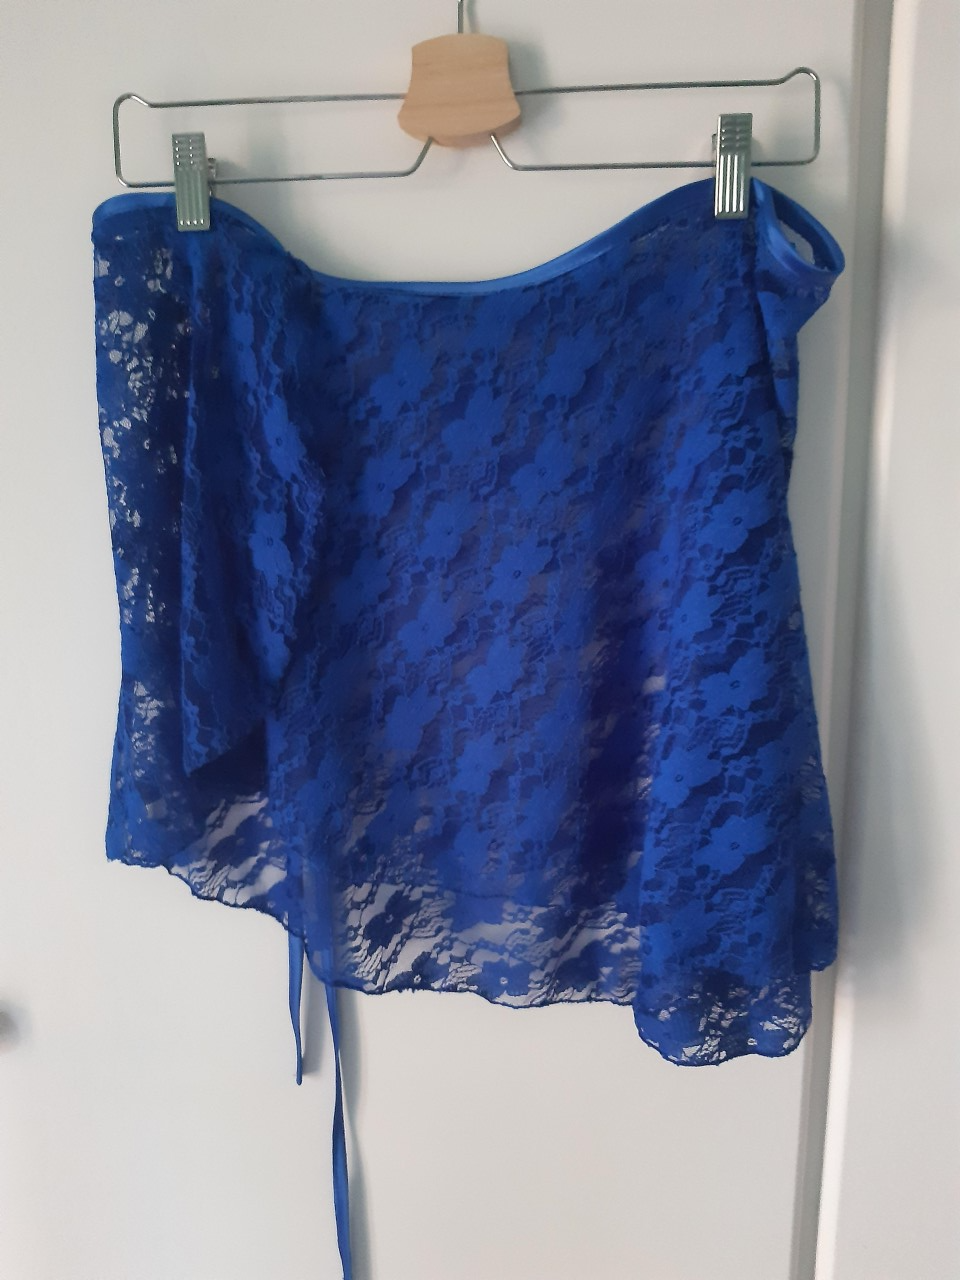 Starry Blue Lace Wrap Skirt - Dancewear by Patricia